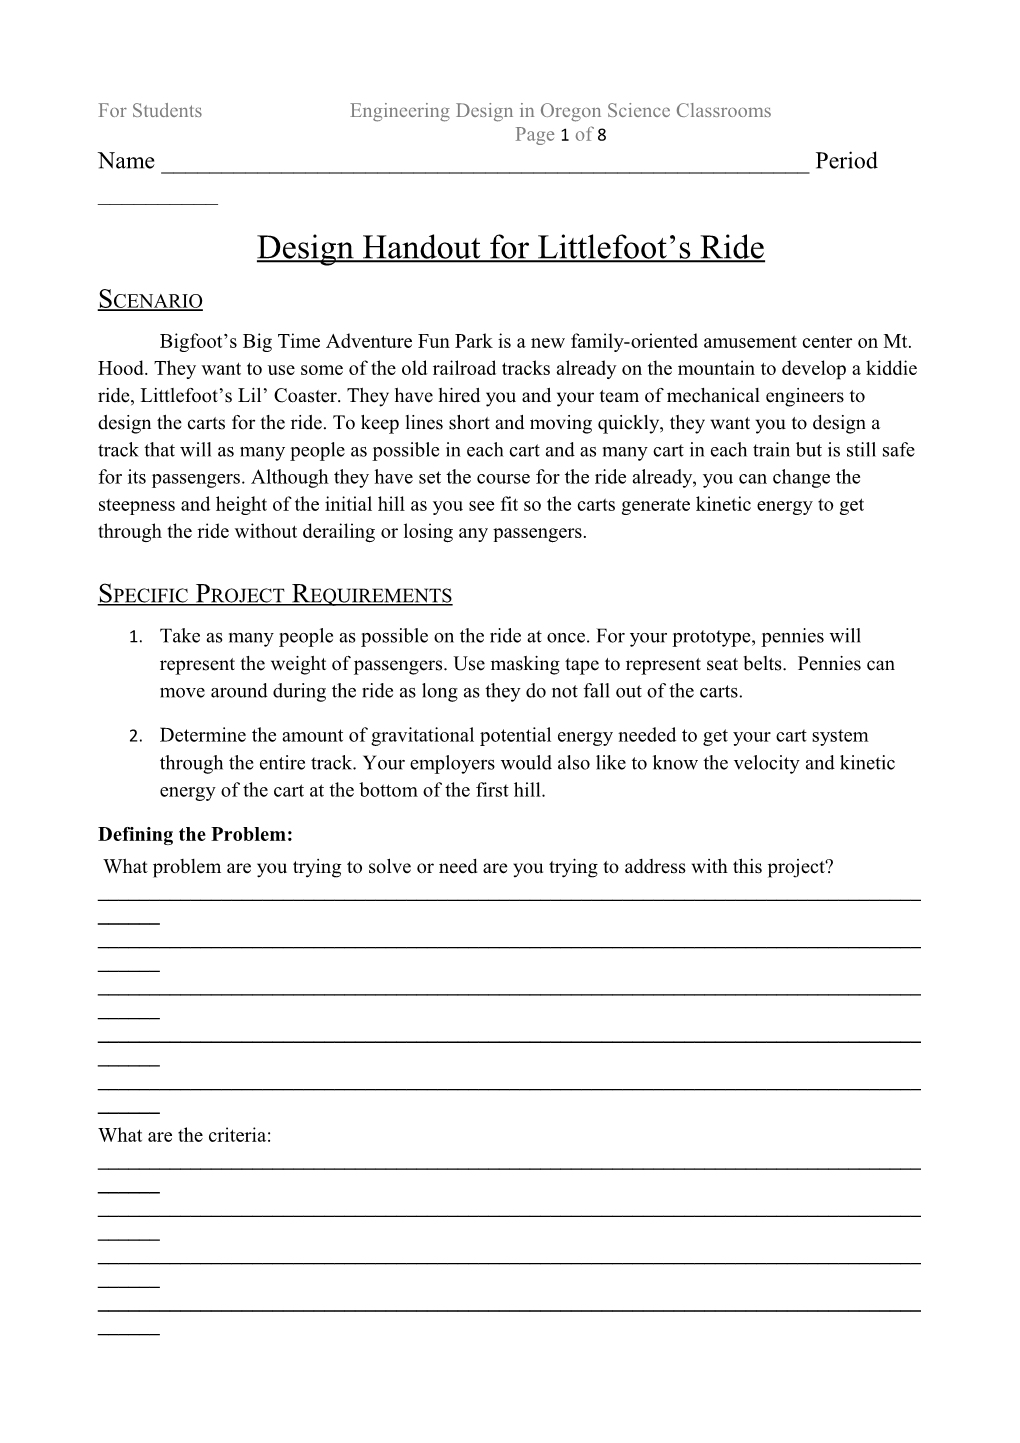 For Students Engineering Design in Oregon Science Classrooms Page 1 of 6